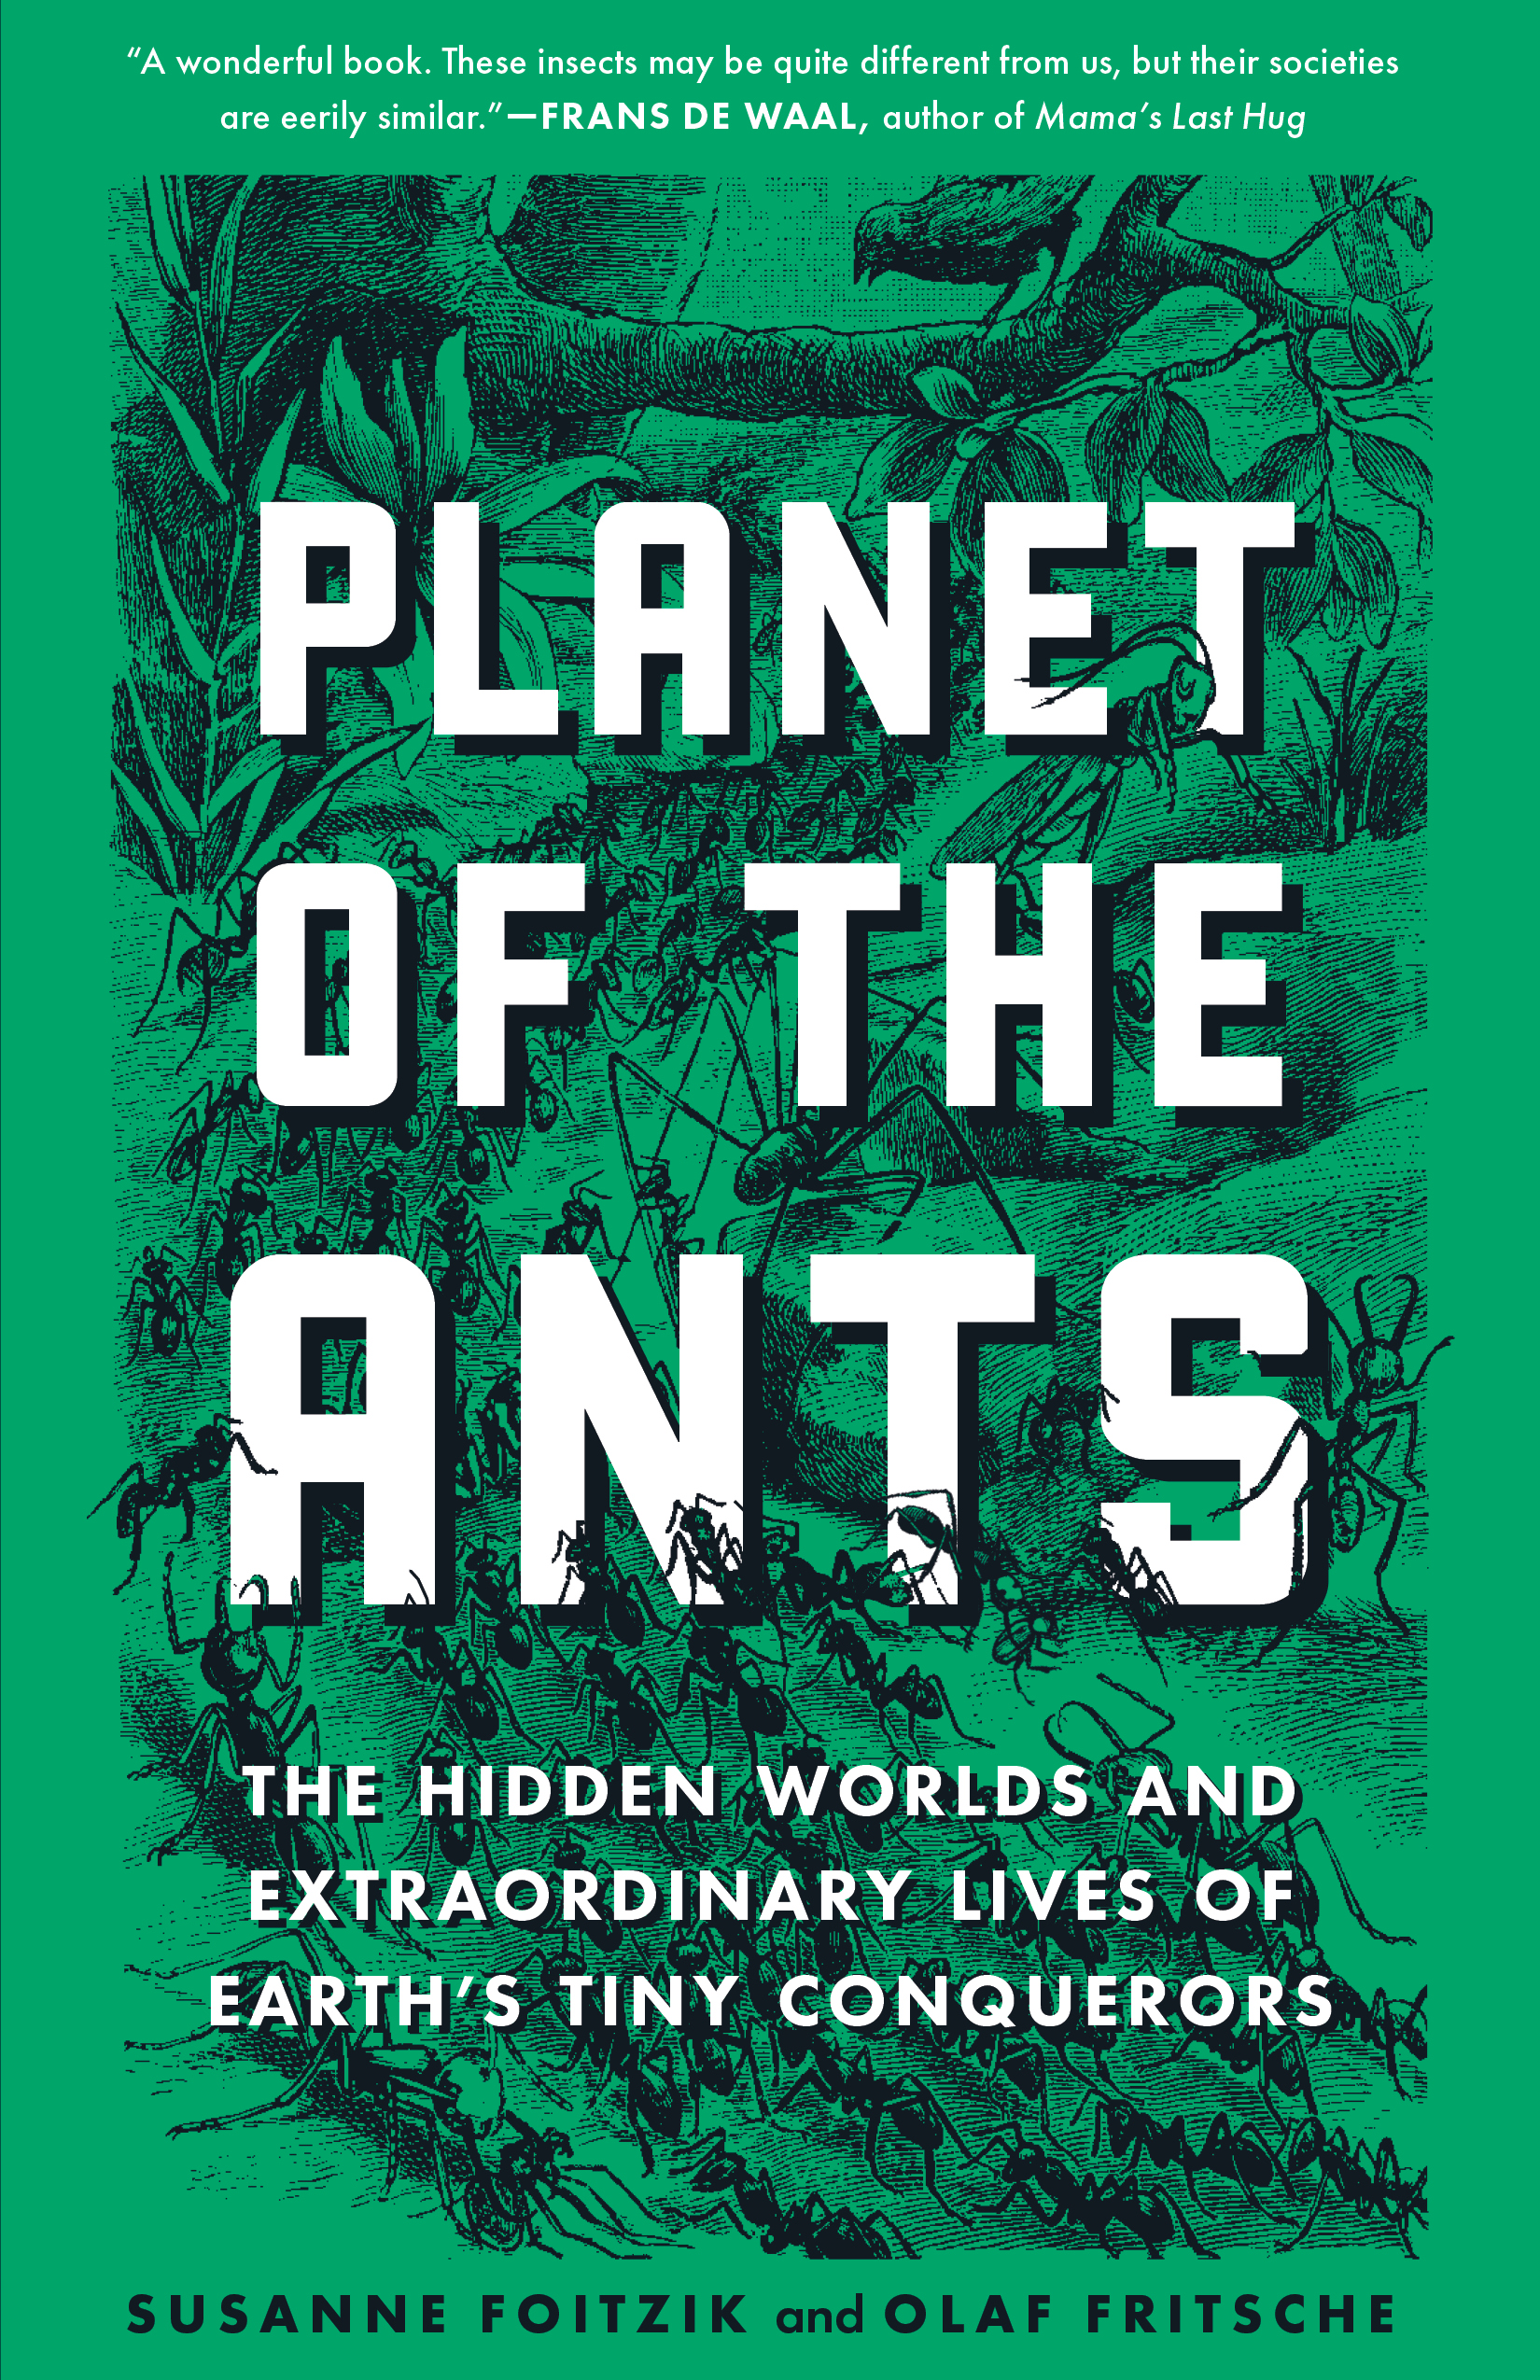 Image de couverture de Empire of Ants [electronic resource] : The Hidden Worlds and Extraordinary Lives of Earth's Tiny Conquerors